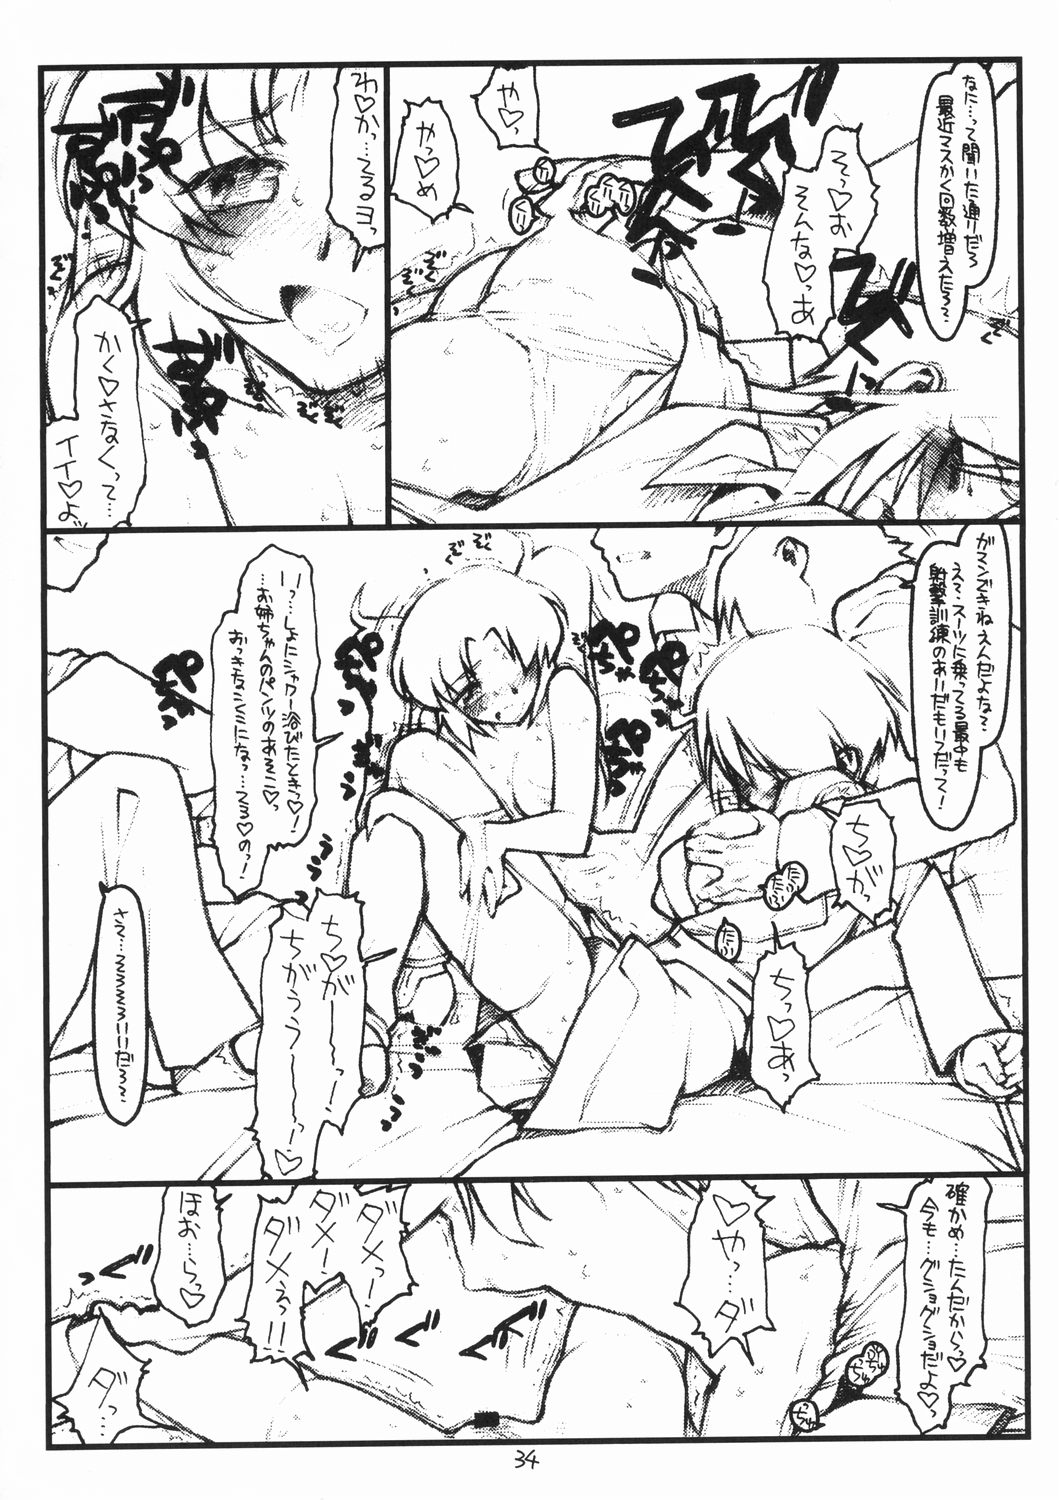 (SC28) [bolze. (rit.)] Miscoordination. (Mobile Suit Gundam SEED DESTINY) page 33 full